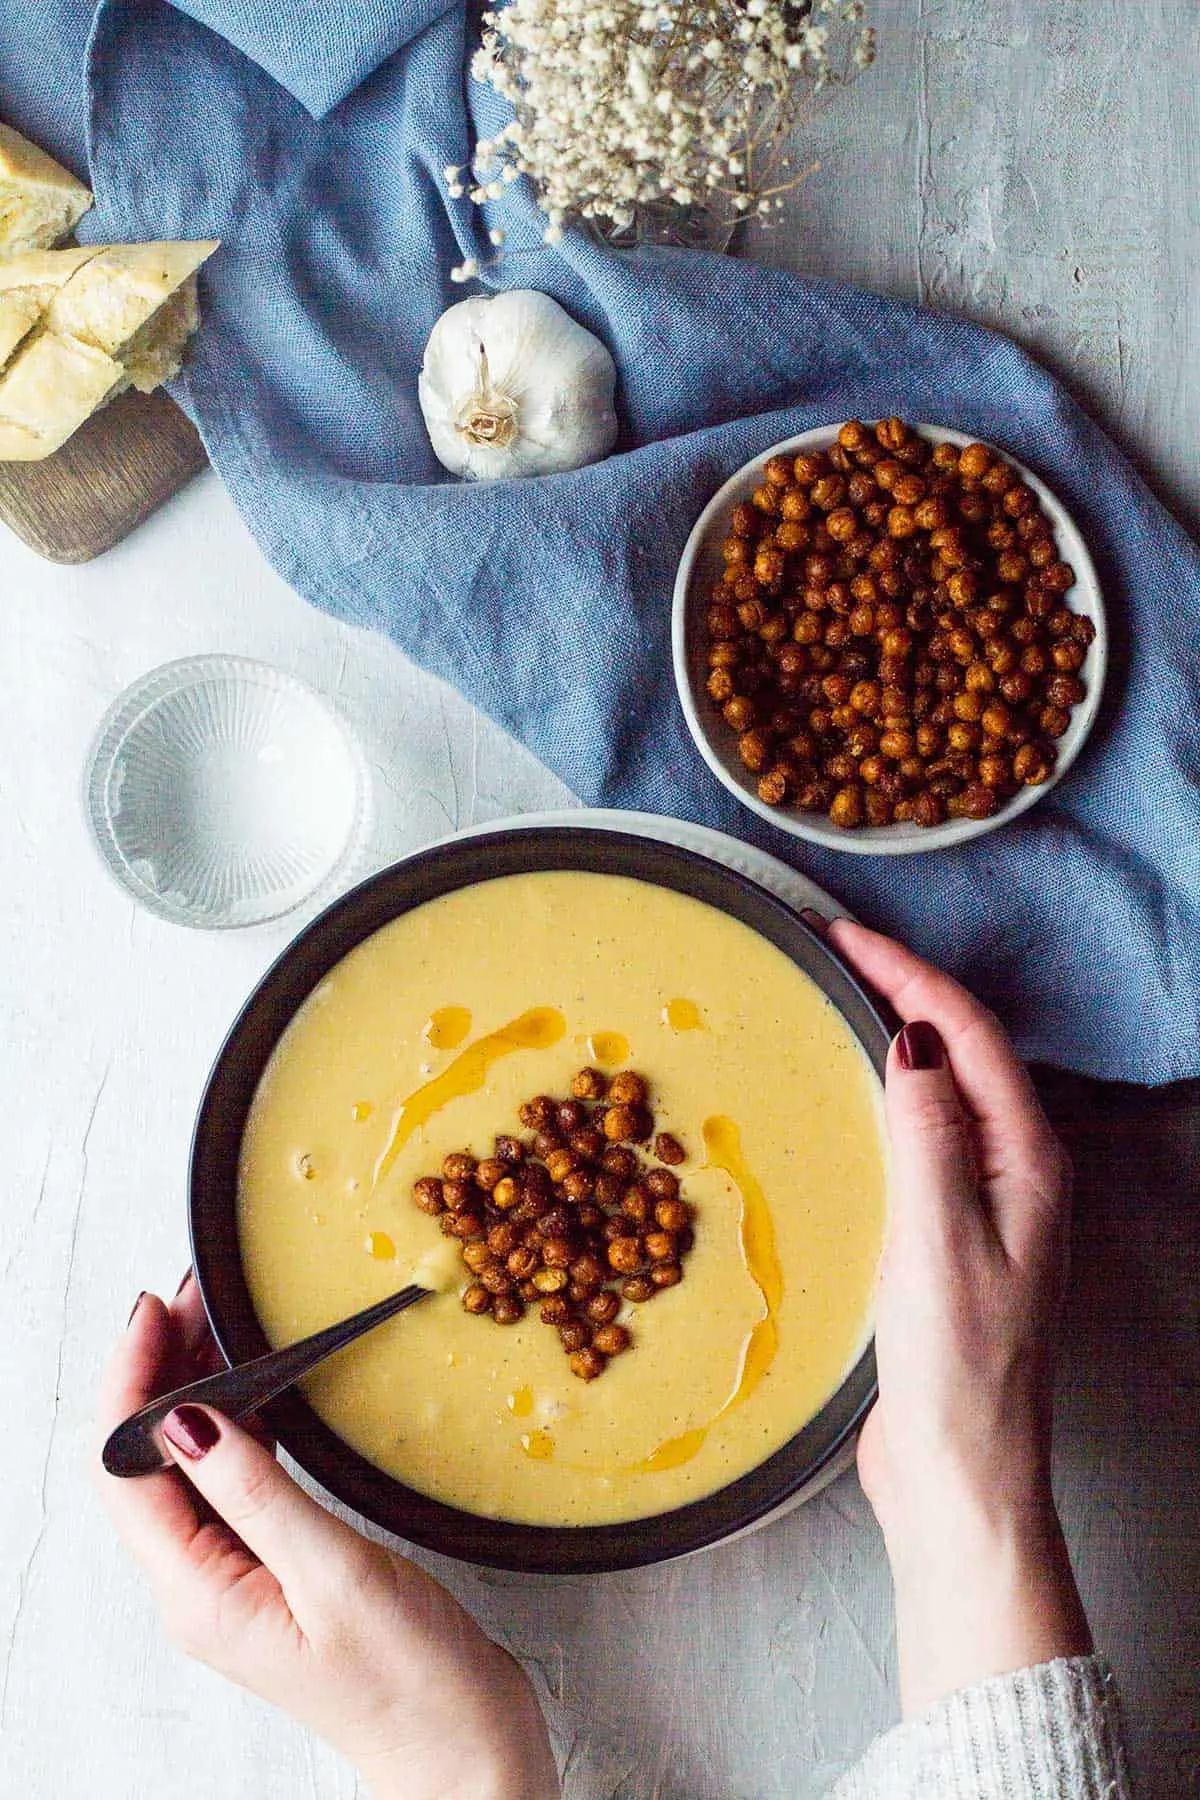 Hands holding a bowl of roasted garlic chickpea soup.